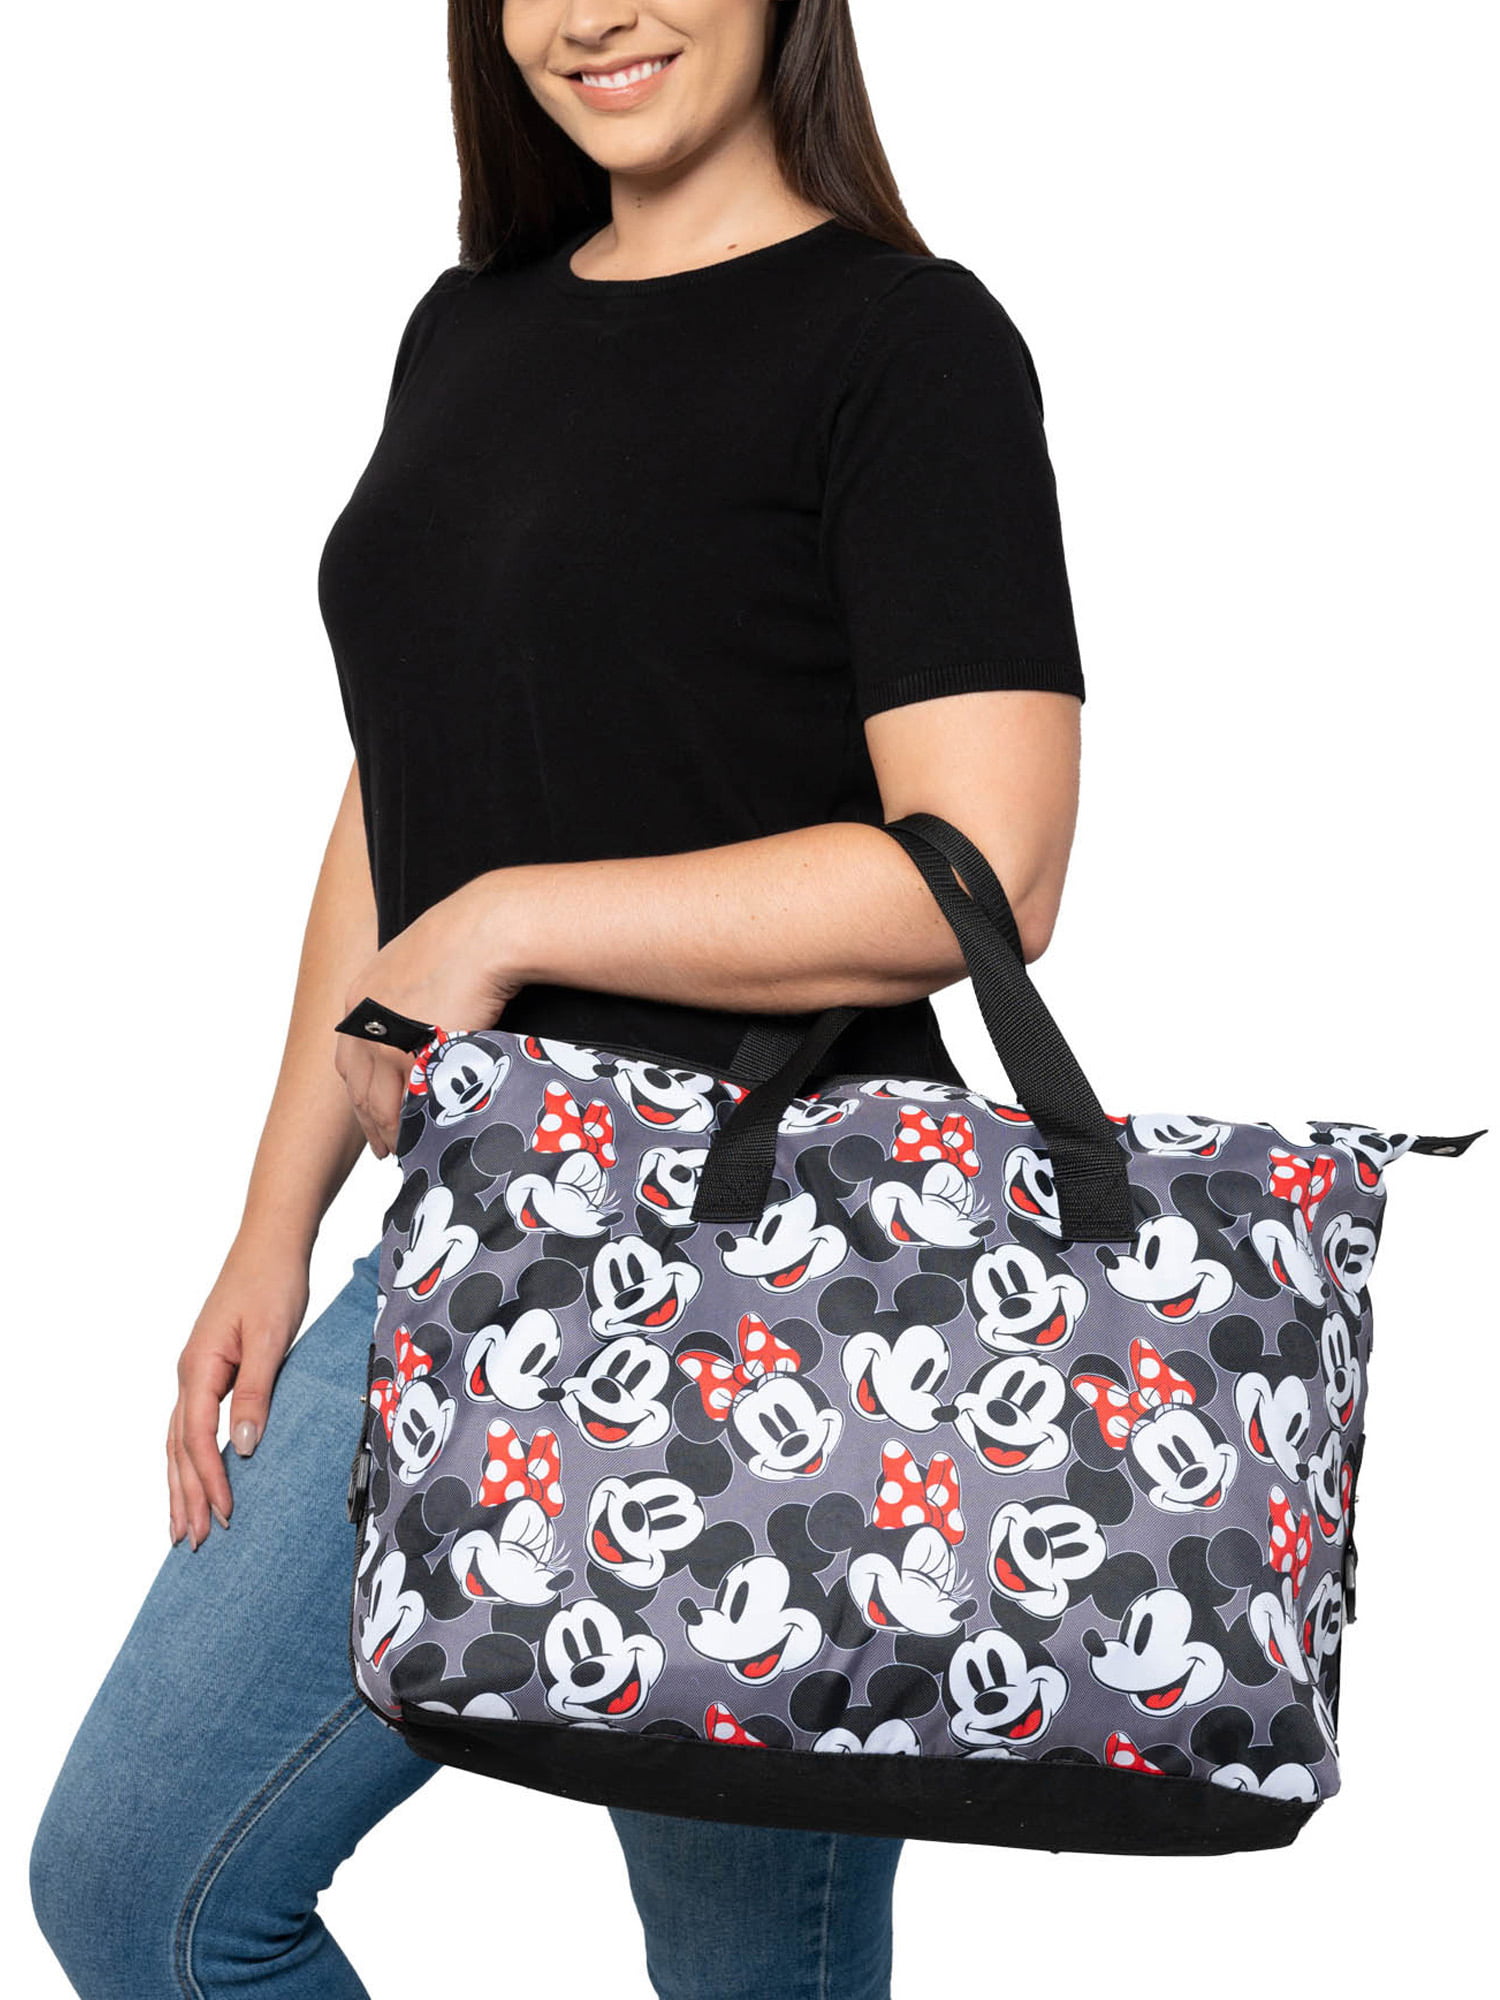 2023New Disney Mickey Fashion Suitcase Travel Tote Bag Men's and